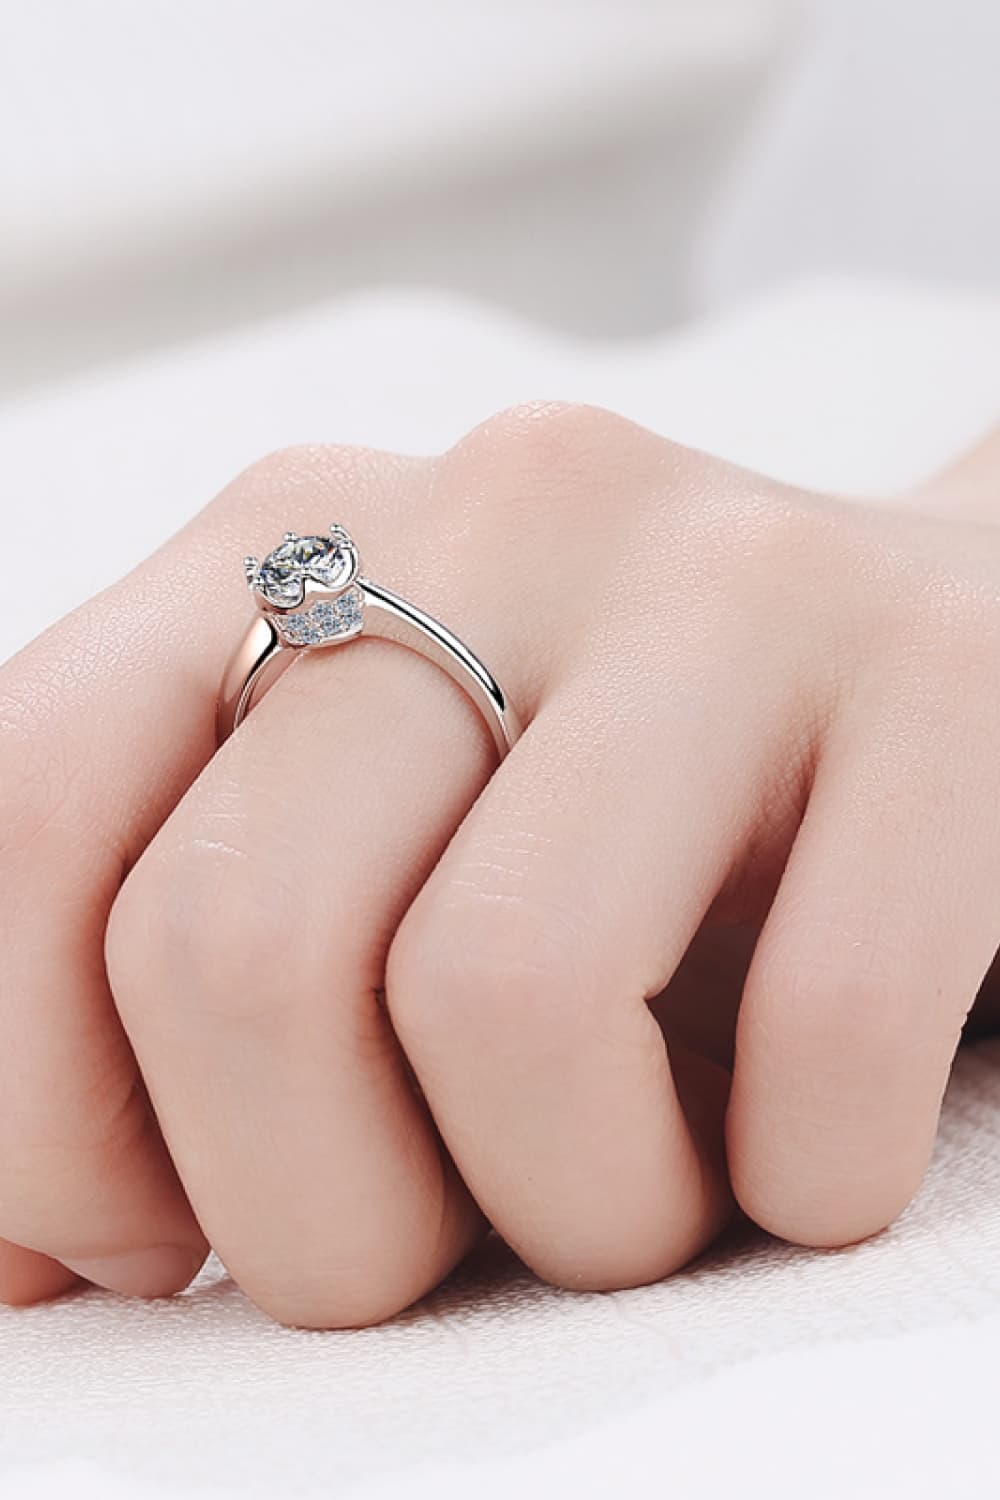 1 Carat Moissanite Rhodium-Plated Solitaire Ring Ti Amo I love you